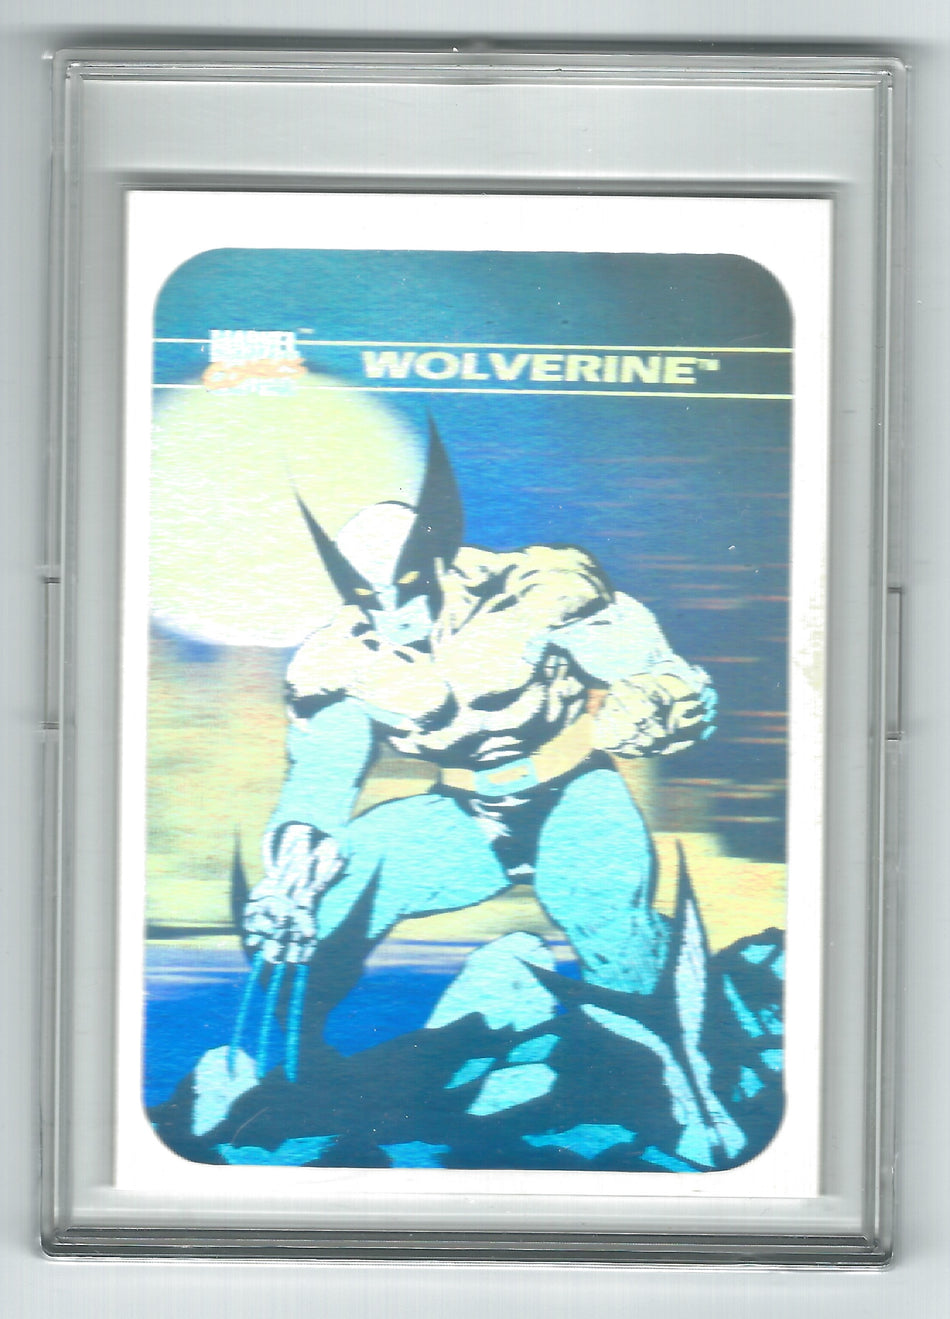 Photo of Marvel Universe Series 1 (Impel, 1990) Card #MH4 NM Hologram Wolverine Collectible Card sold by Stronghold Collectibles